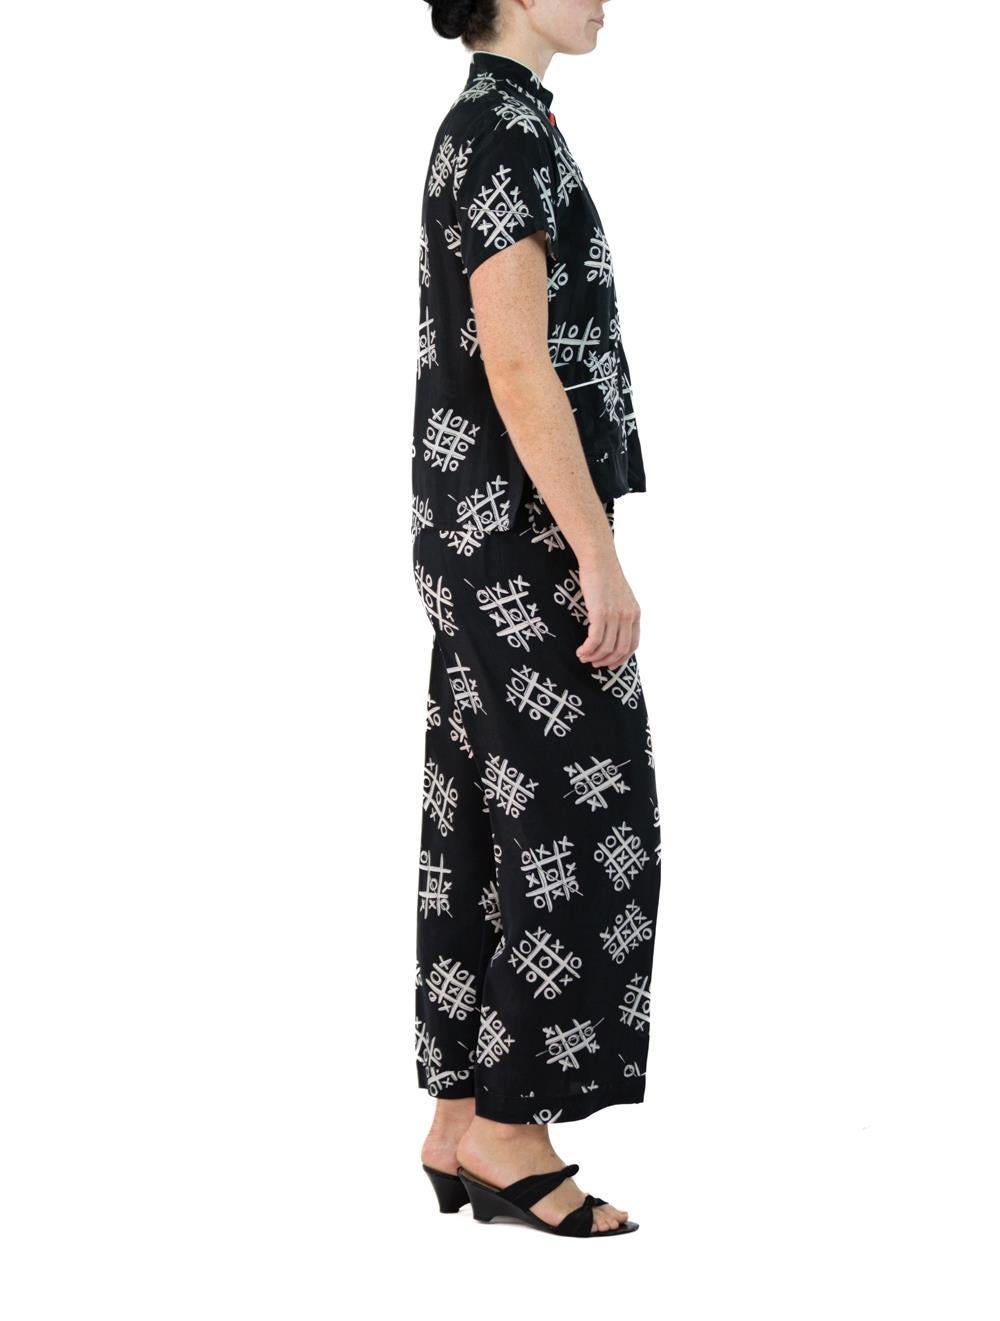 Morphew Collection Black & White Tic Tac Toe Novelty Print Cold Rayon Bias Paja In Excellent Condition For Sale In New York, NY